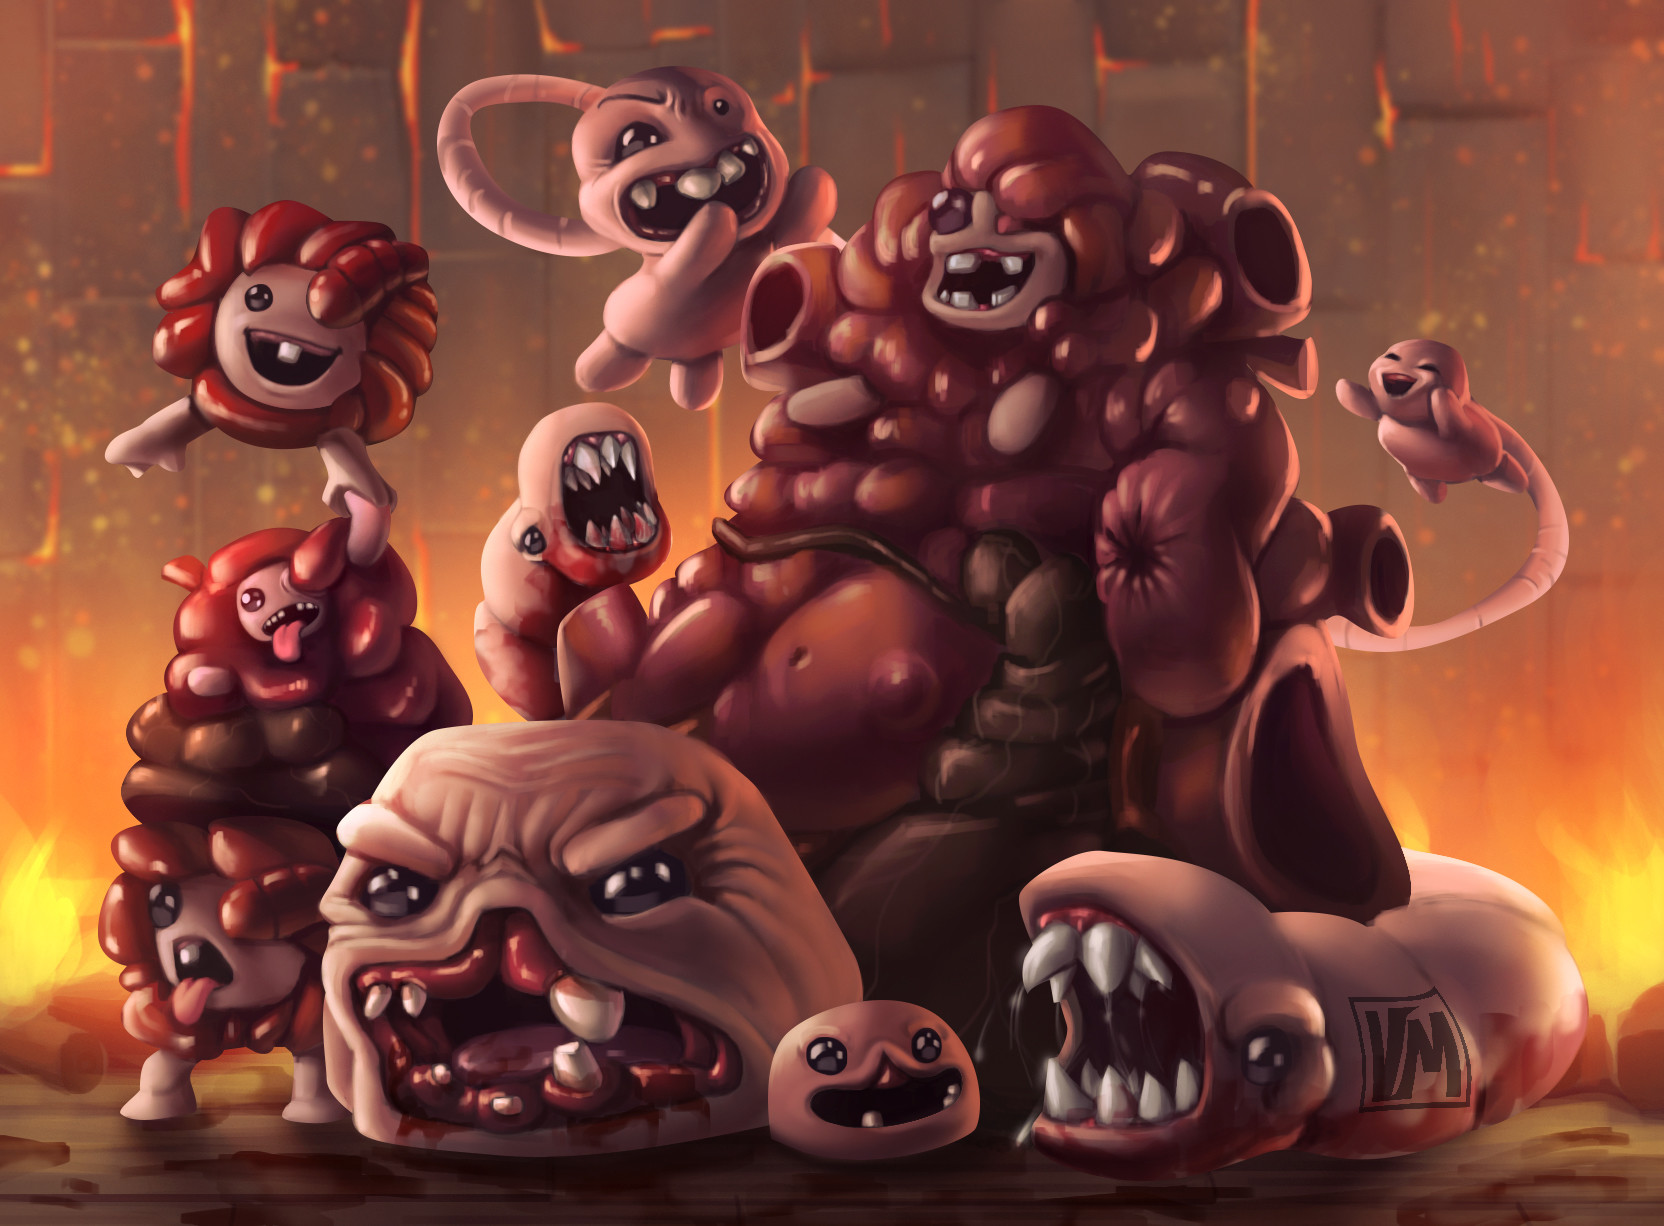 The Binding of Isaac Bosses.